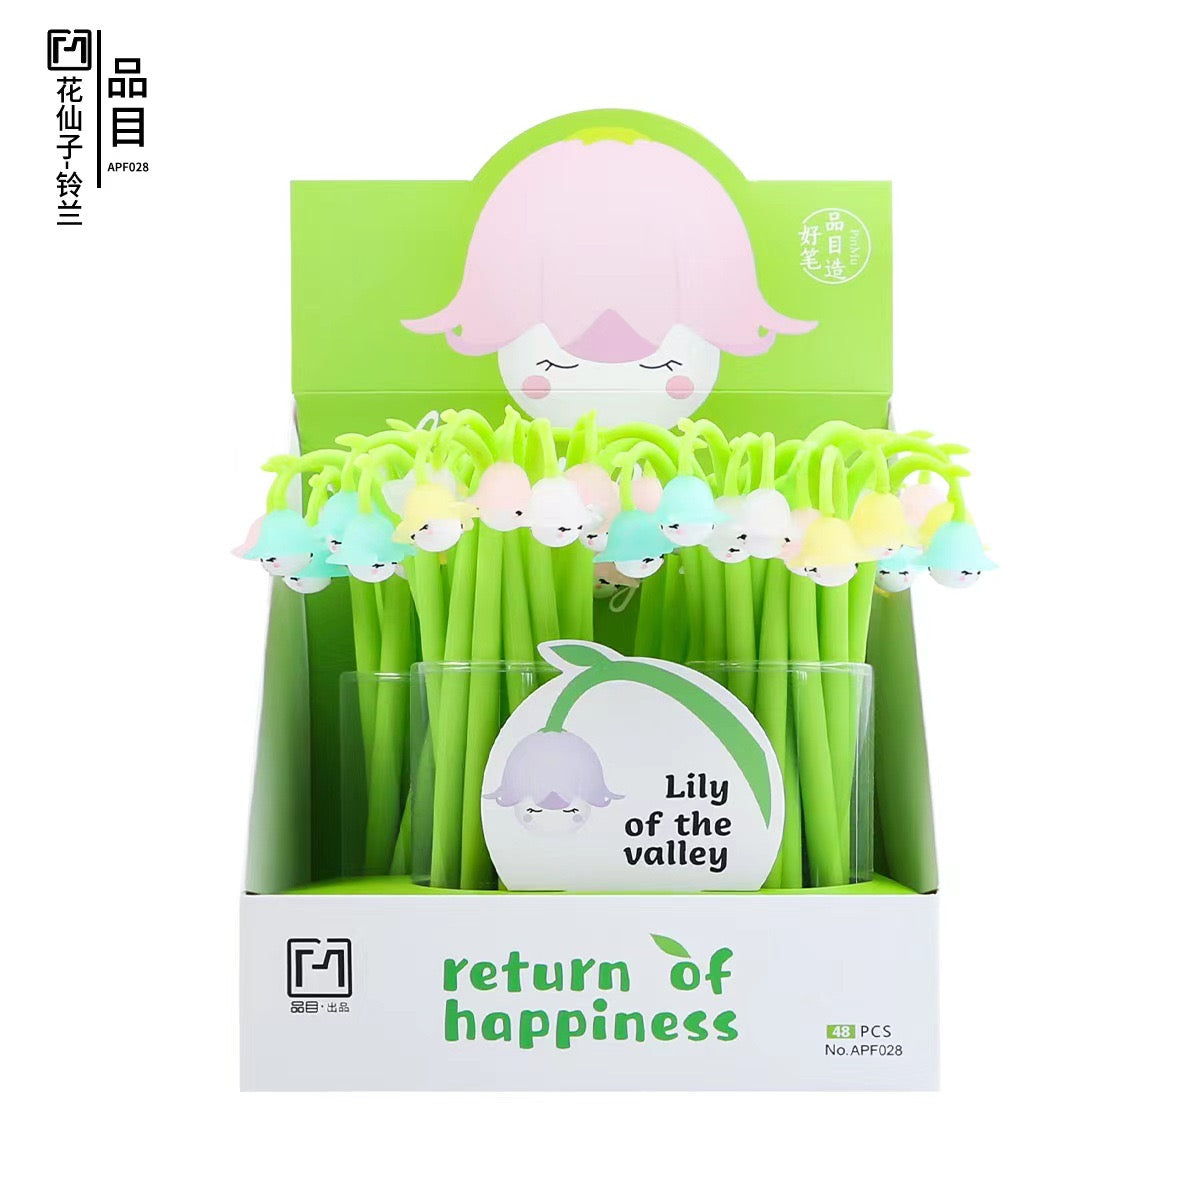 22486 HAPPINESS LILY GEL PEN-48